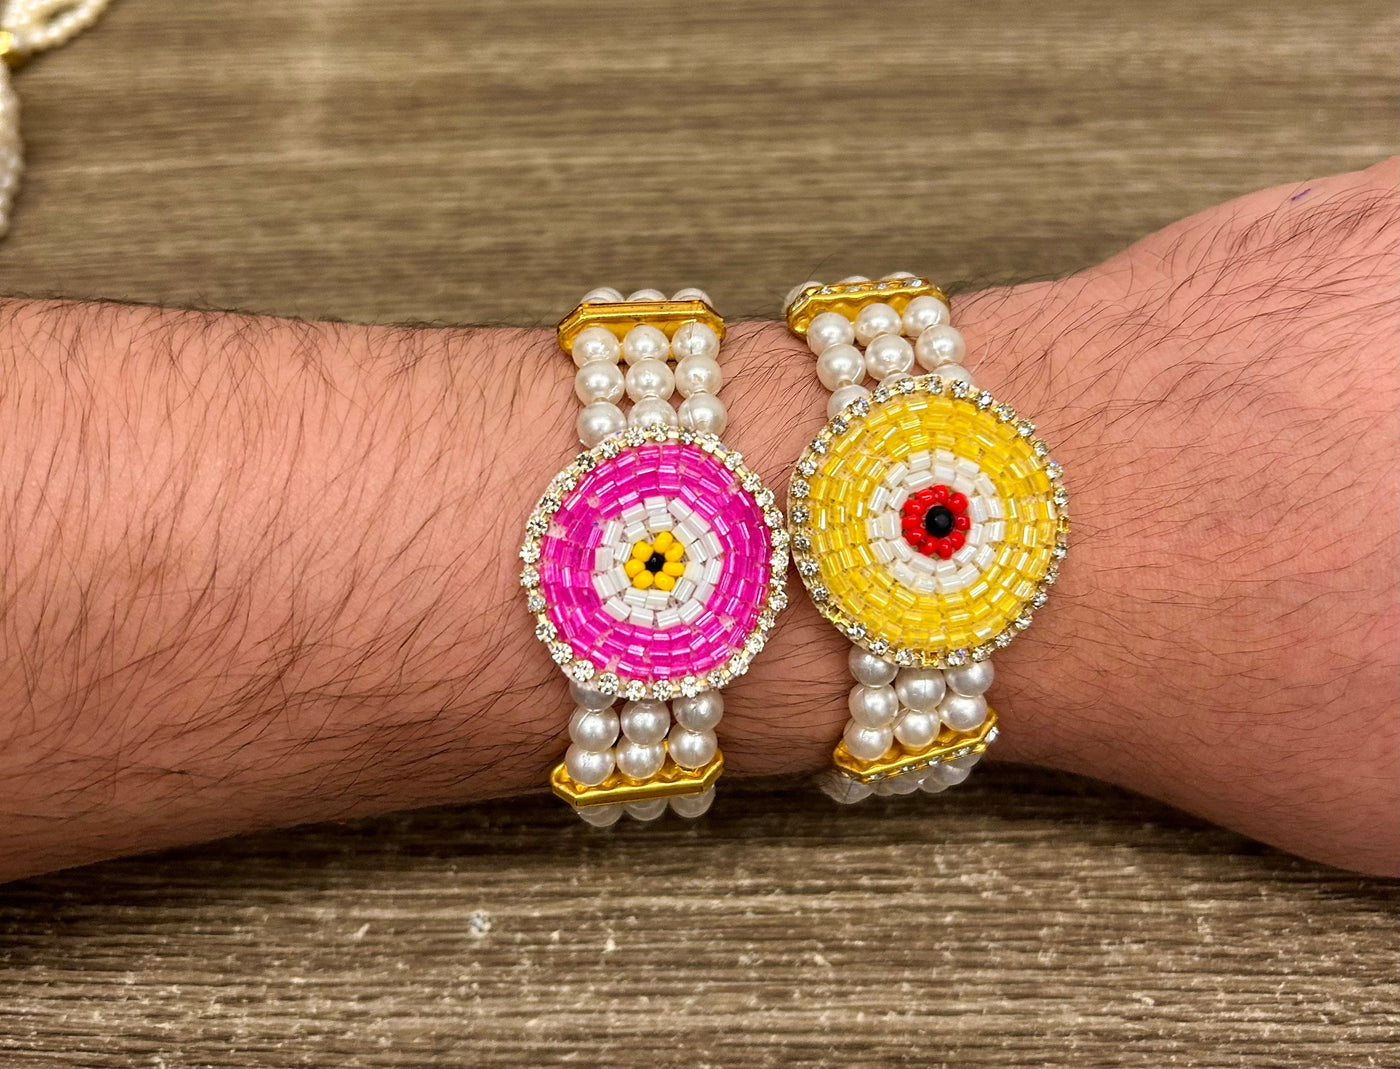 80 Rs pair on buying minimum 50 pairs | Whatsapp at 8619550223 evil eye bracelets LAMANSH Evil Eye 🧿 Elastic Bracelets for giveaways 🎁 to bridesmaids and guests / Rakhi bracelets for brothers, sisters and bhabhi